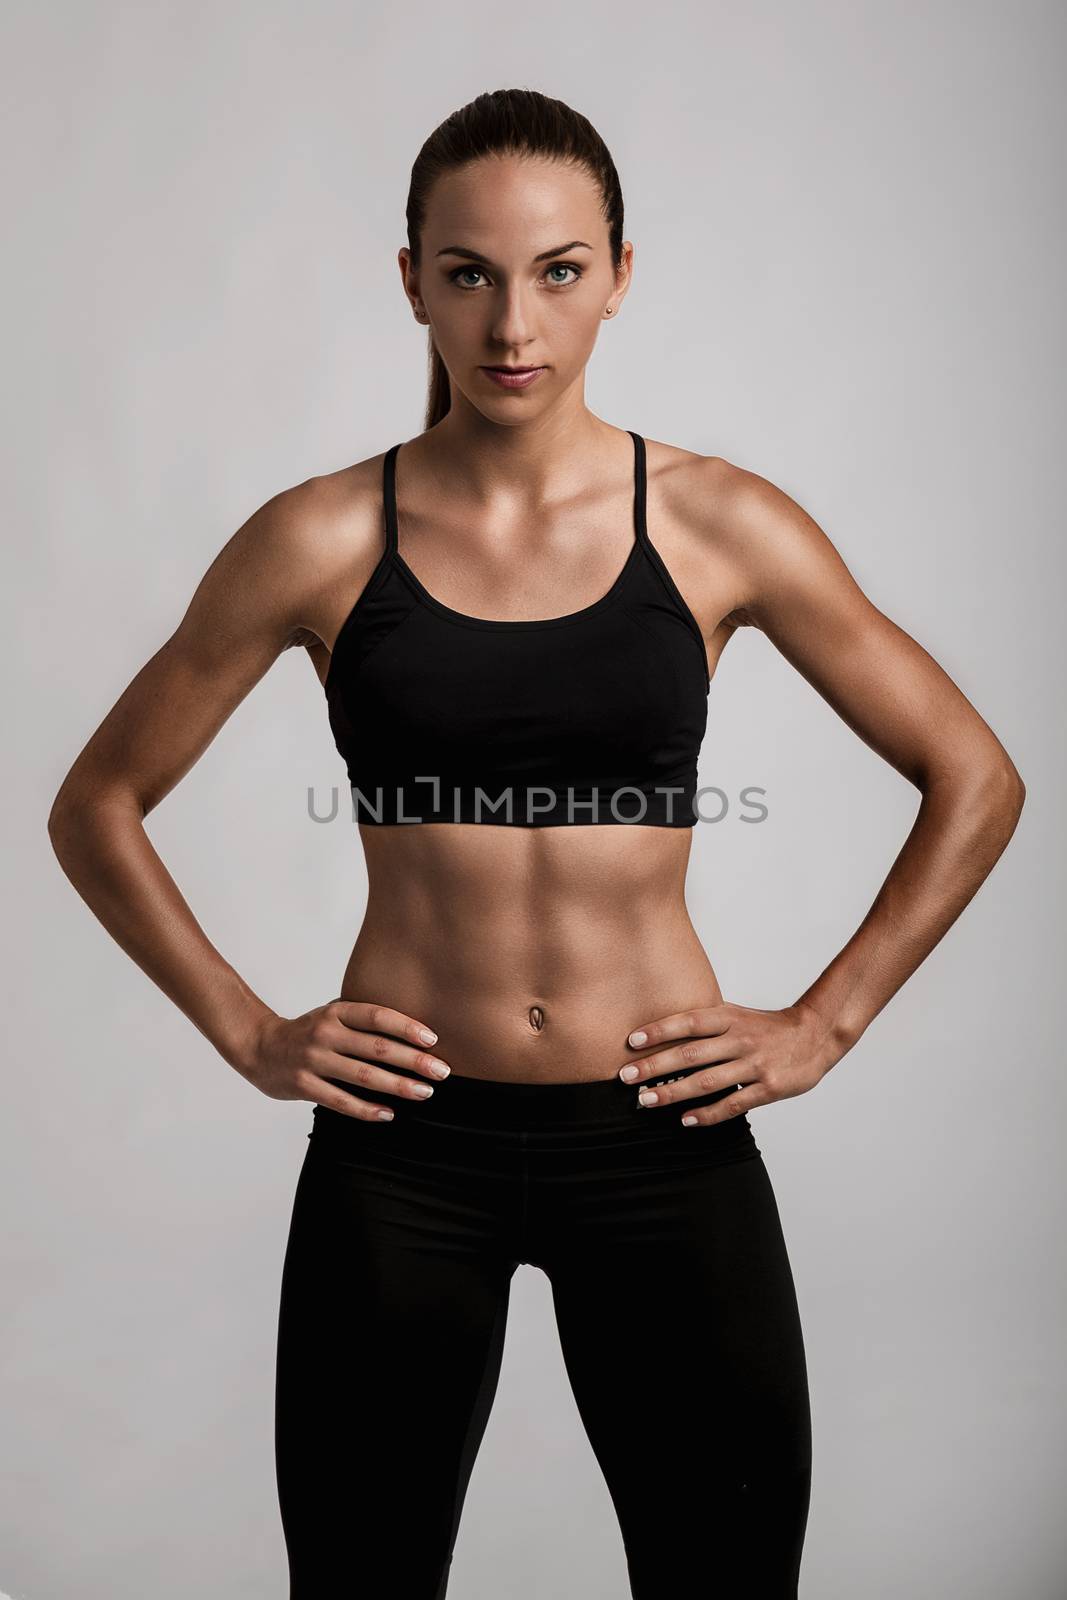 Portrait of sporty young woman with muscular body looking at camera